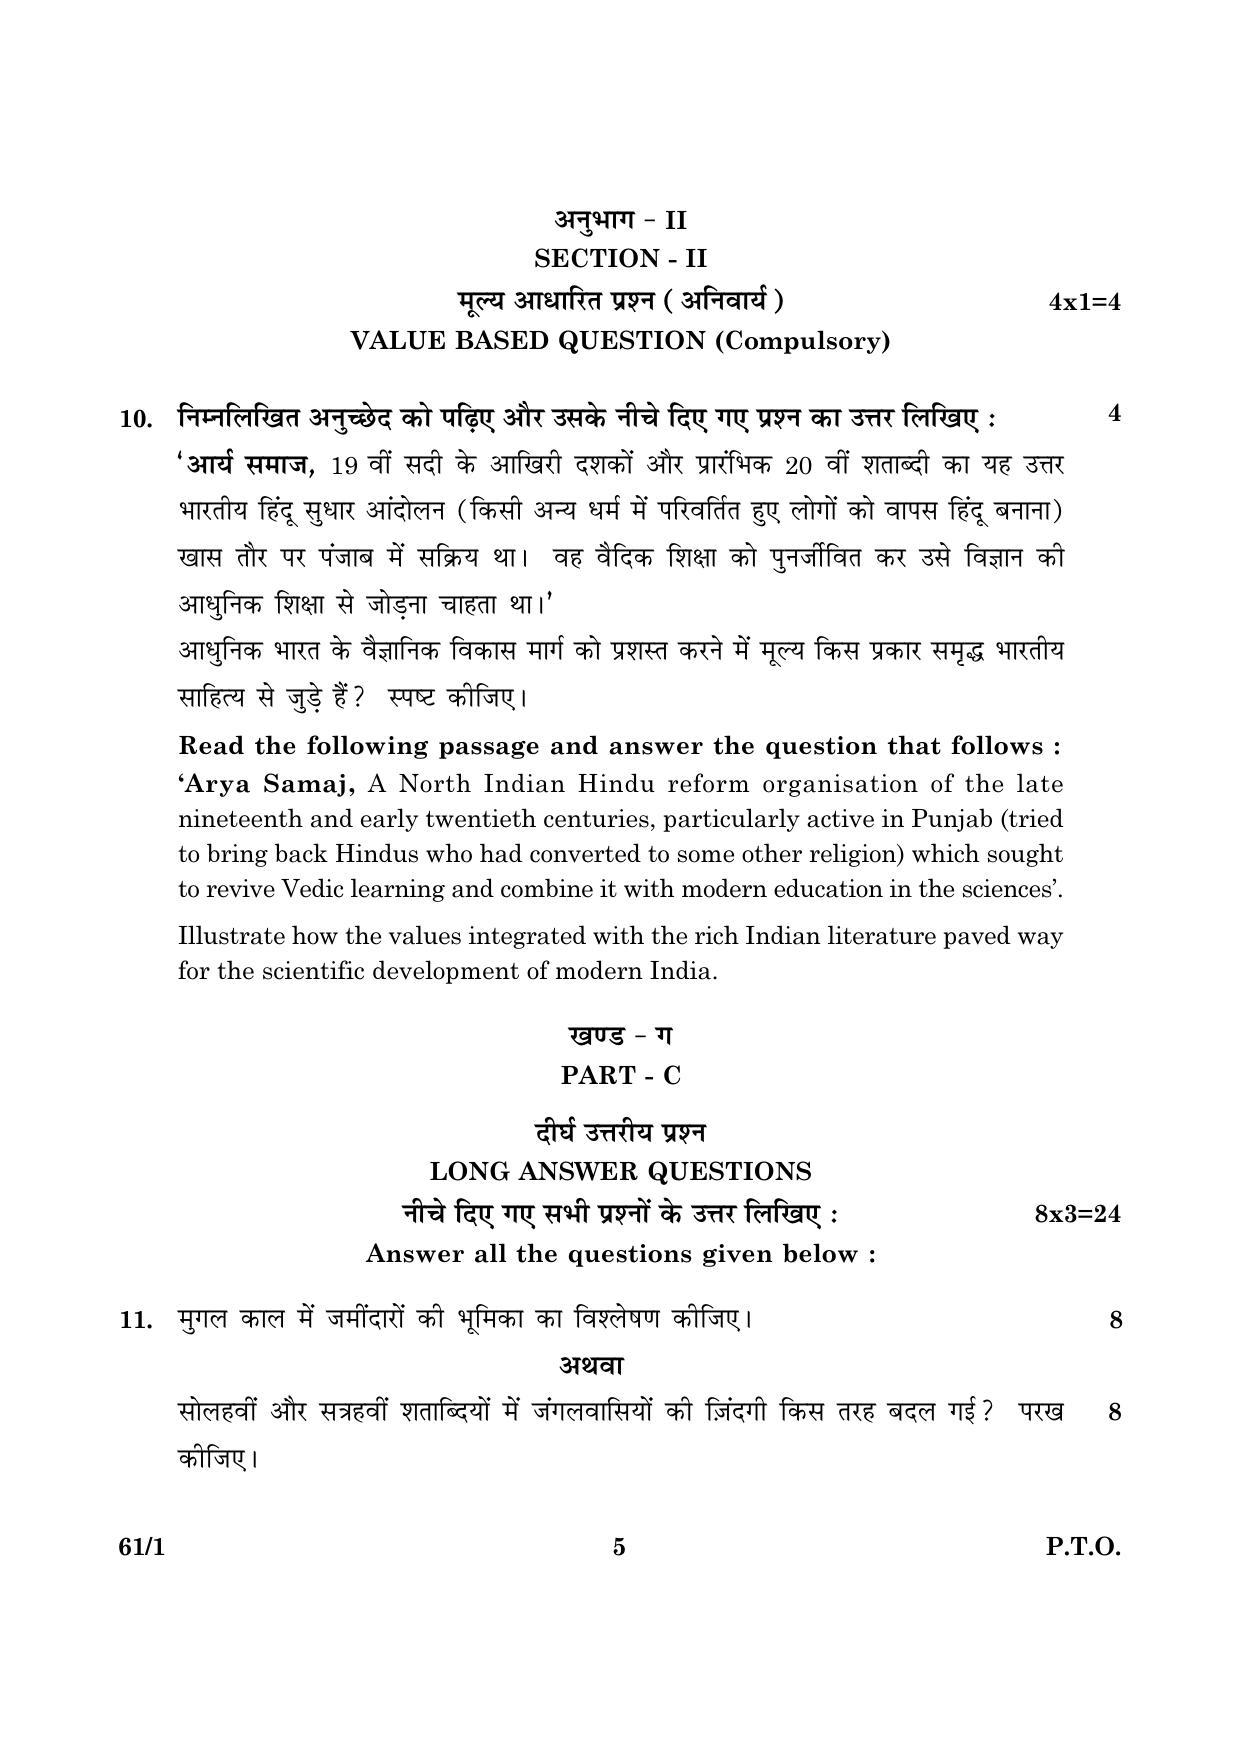 CBSE Class 12 061 Set 1 History 2016 Question Paper - Page 5